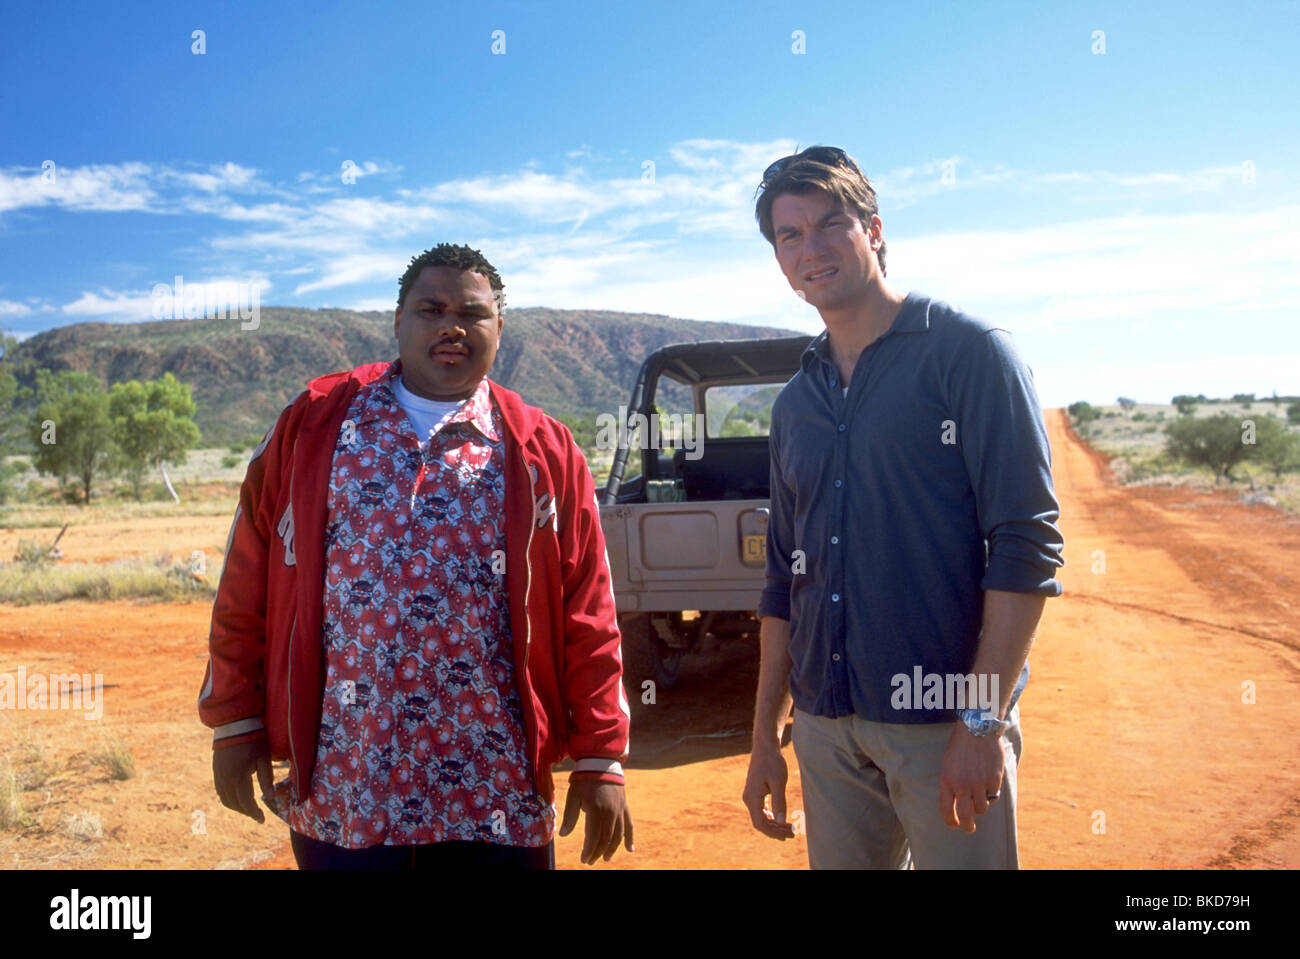 KANGAROO JACK (2003) ANTHONY ANDERSON, JERRY O'CONNELL KGRJ 002-1594 Stock Photo